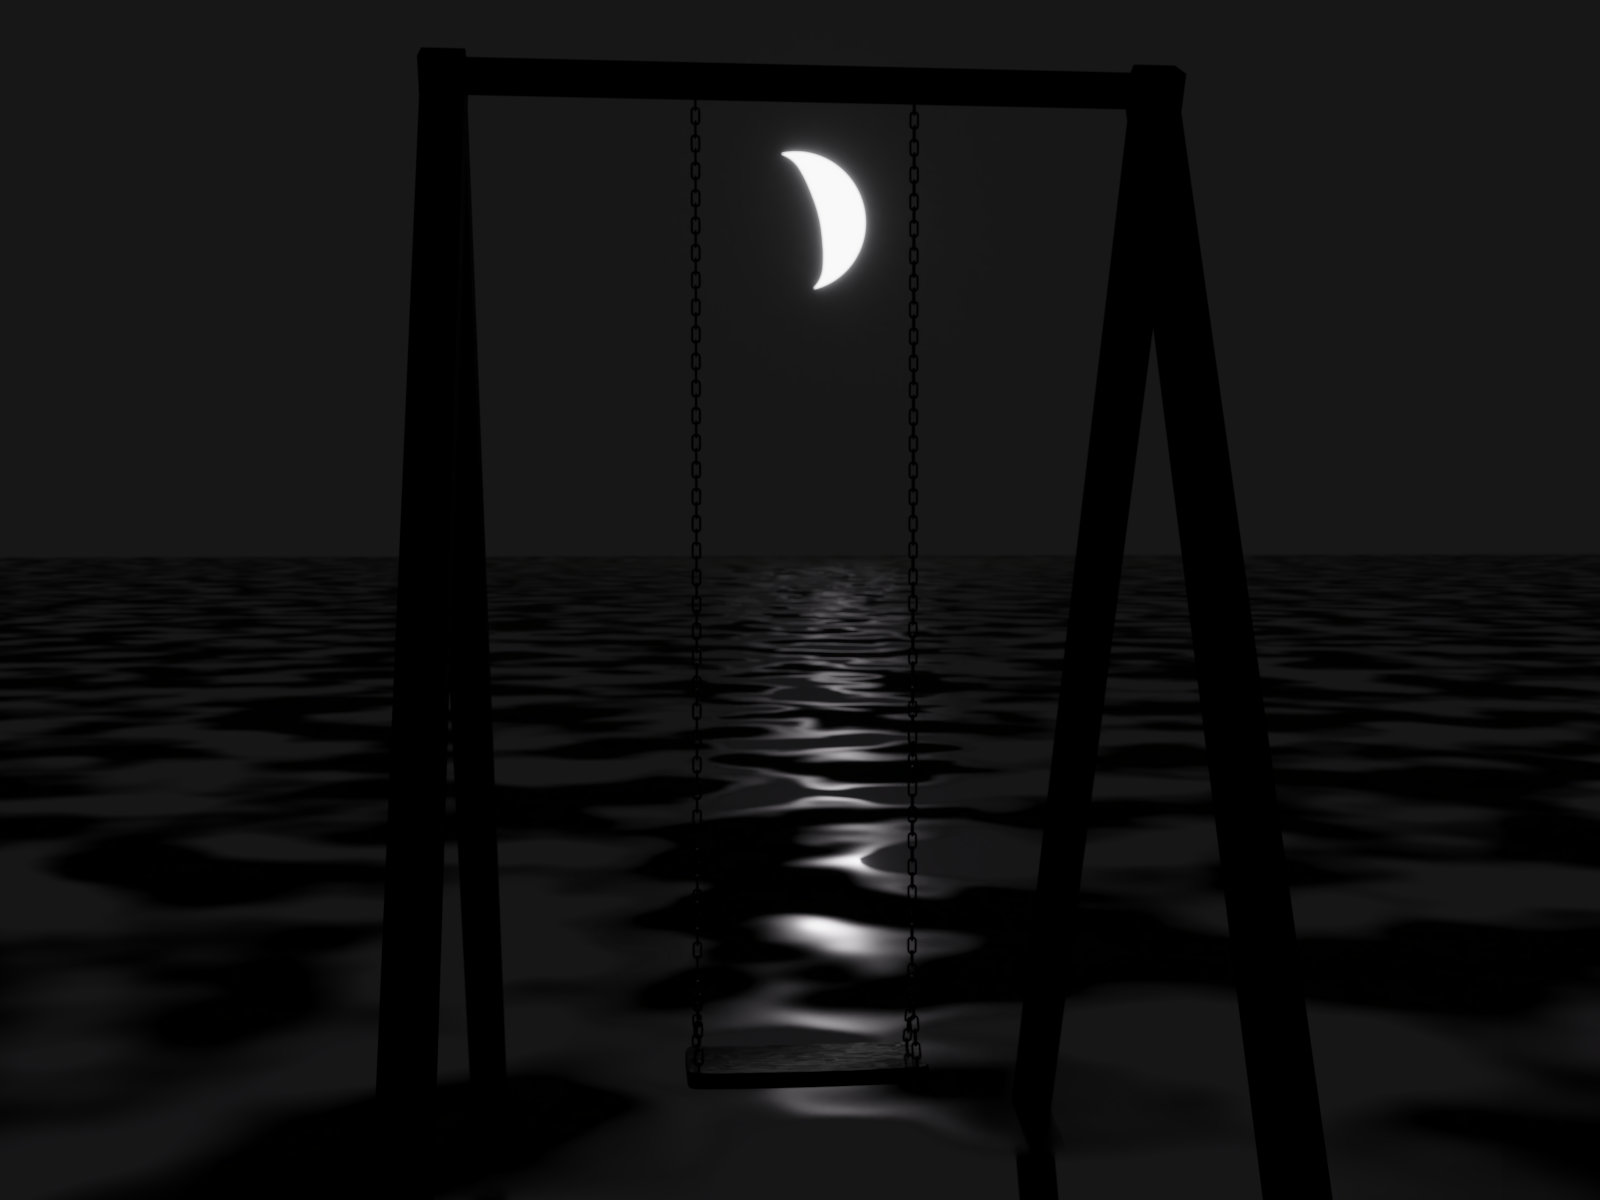 Virtual abstract scenery, Abstract digital art, Raytracing, Computer-rendered image, 2021. A child's swing stands alone and lost in the backlight of the moon on a bare, flat surface in the dark of night. It has been raining and the crescent moon is reflected in the puddles.